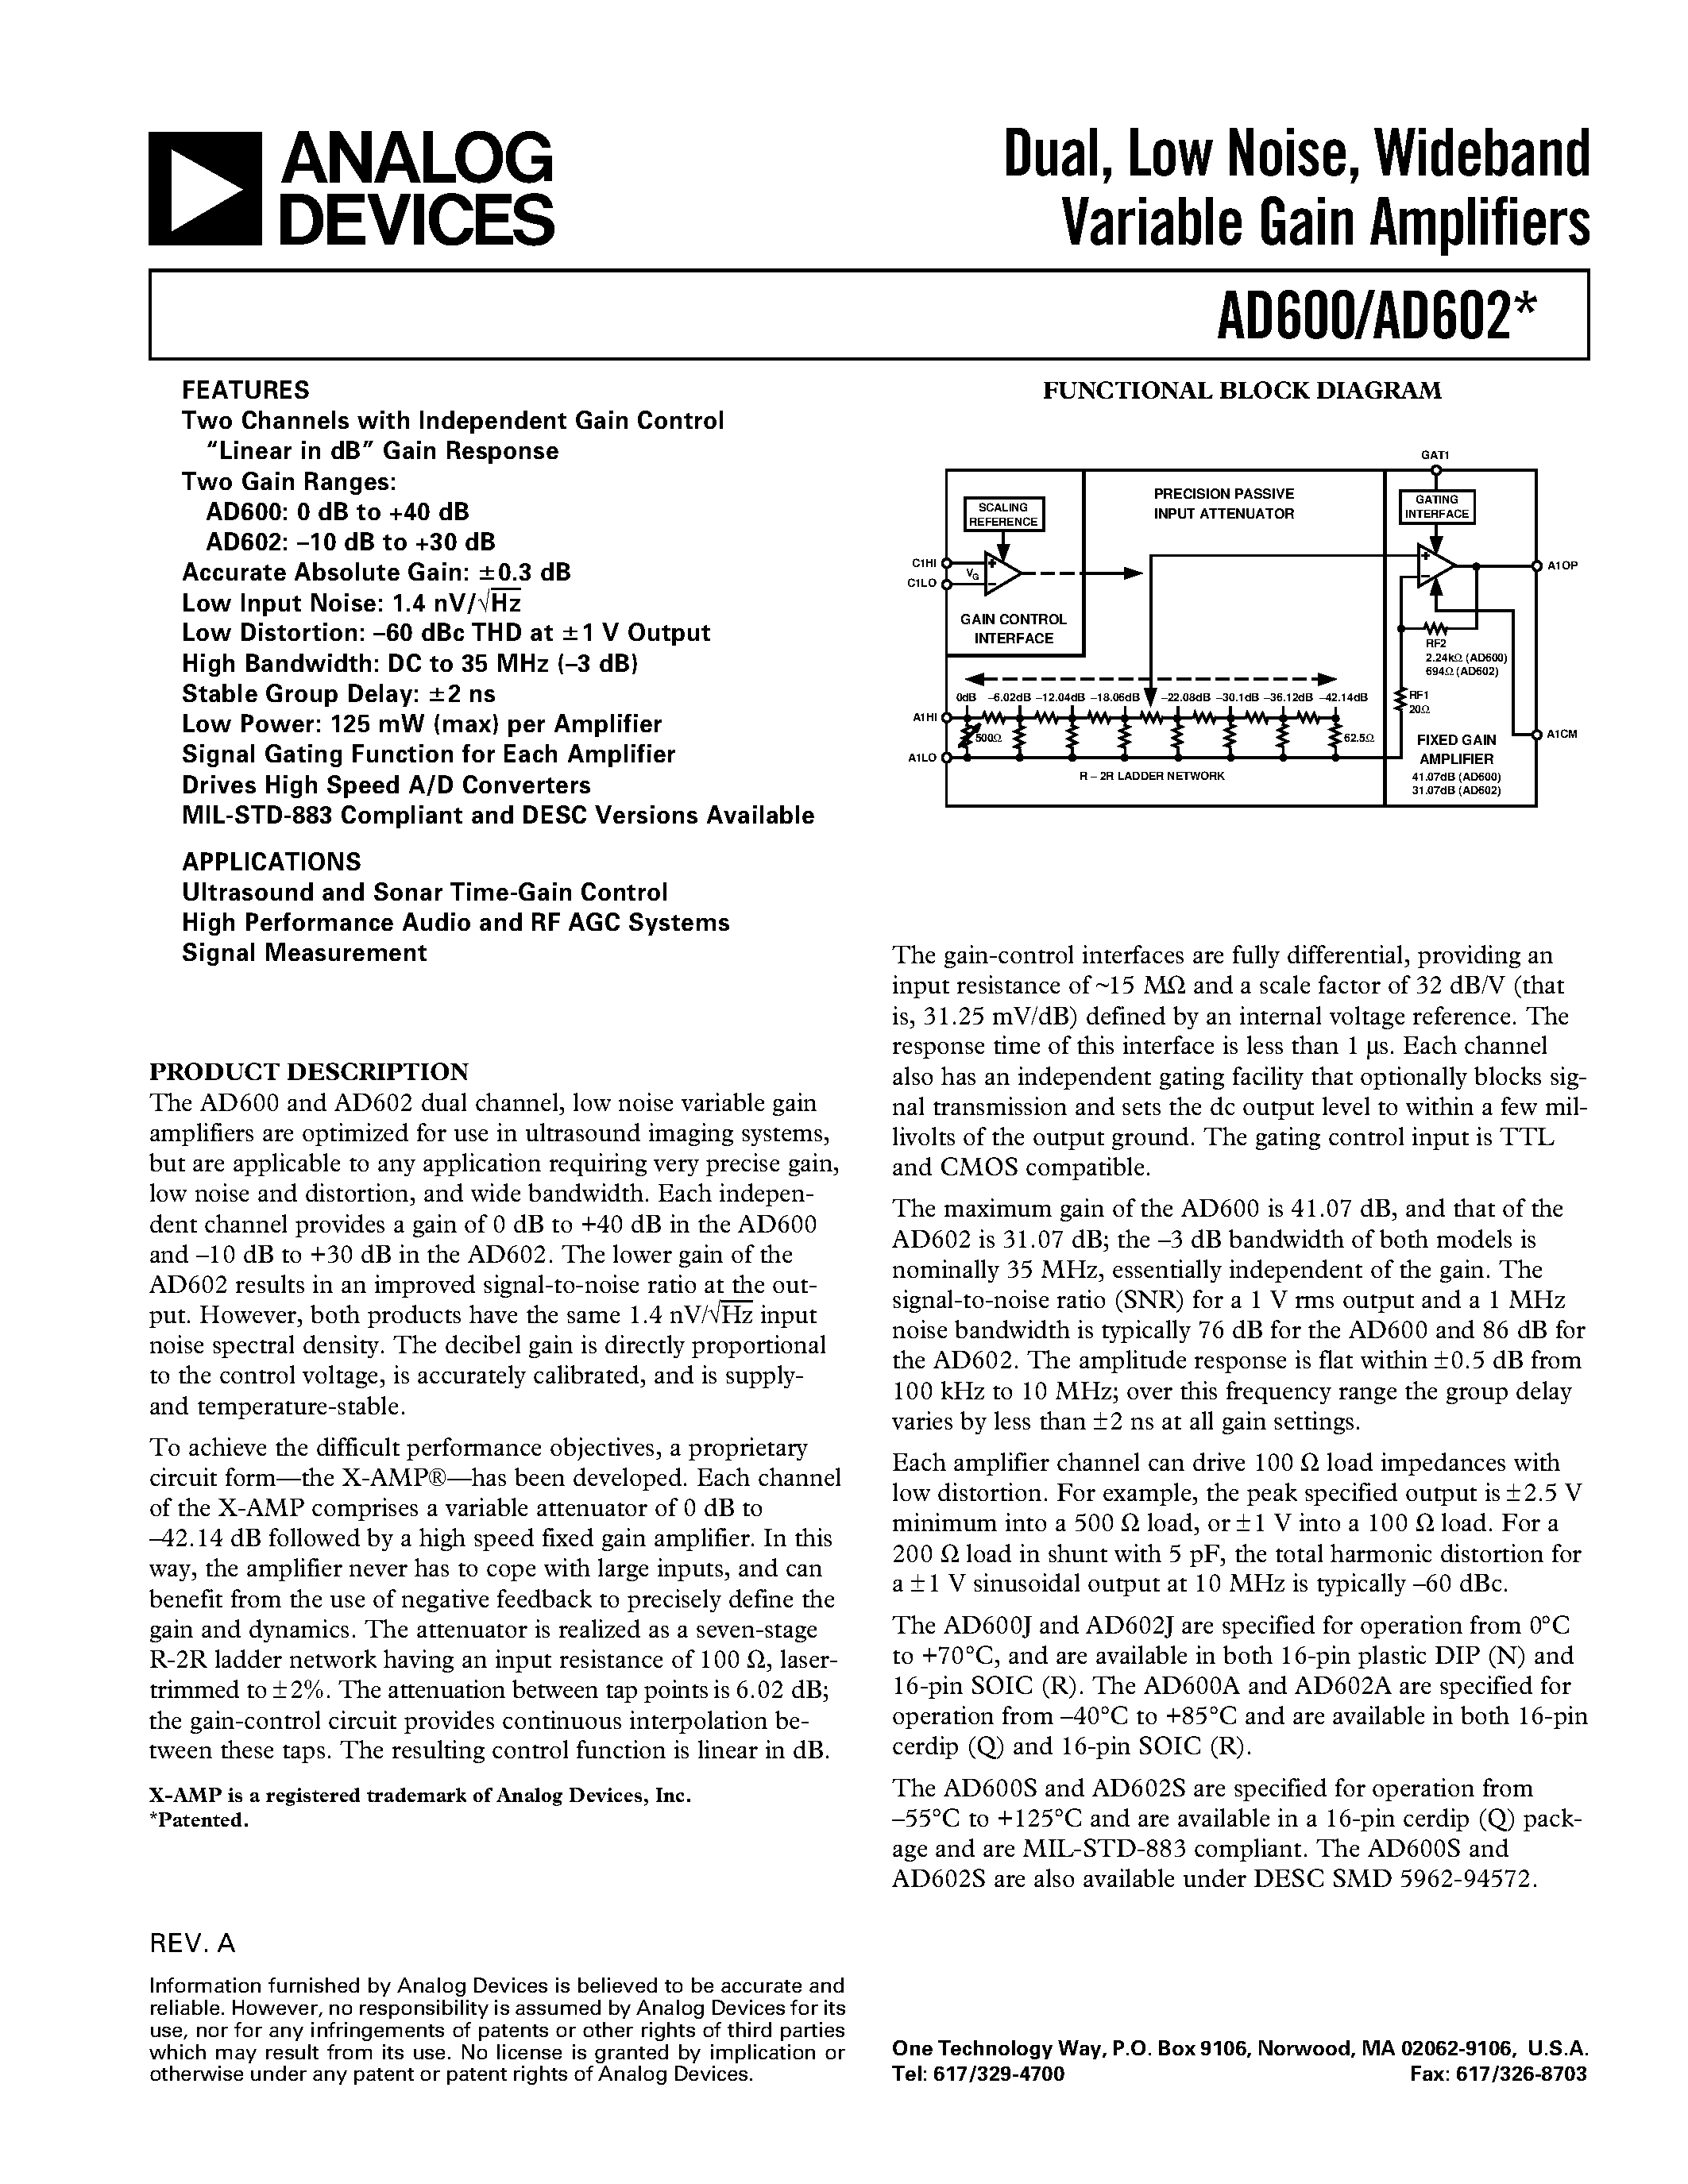 Datasheet AD602AQ - Dual/ Low Noise/ Wideband Variable Gain Amplifiers page 1